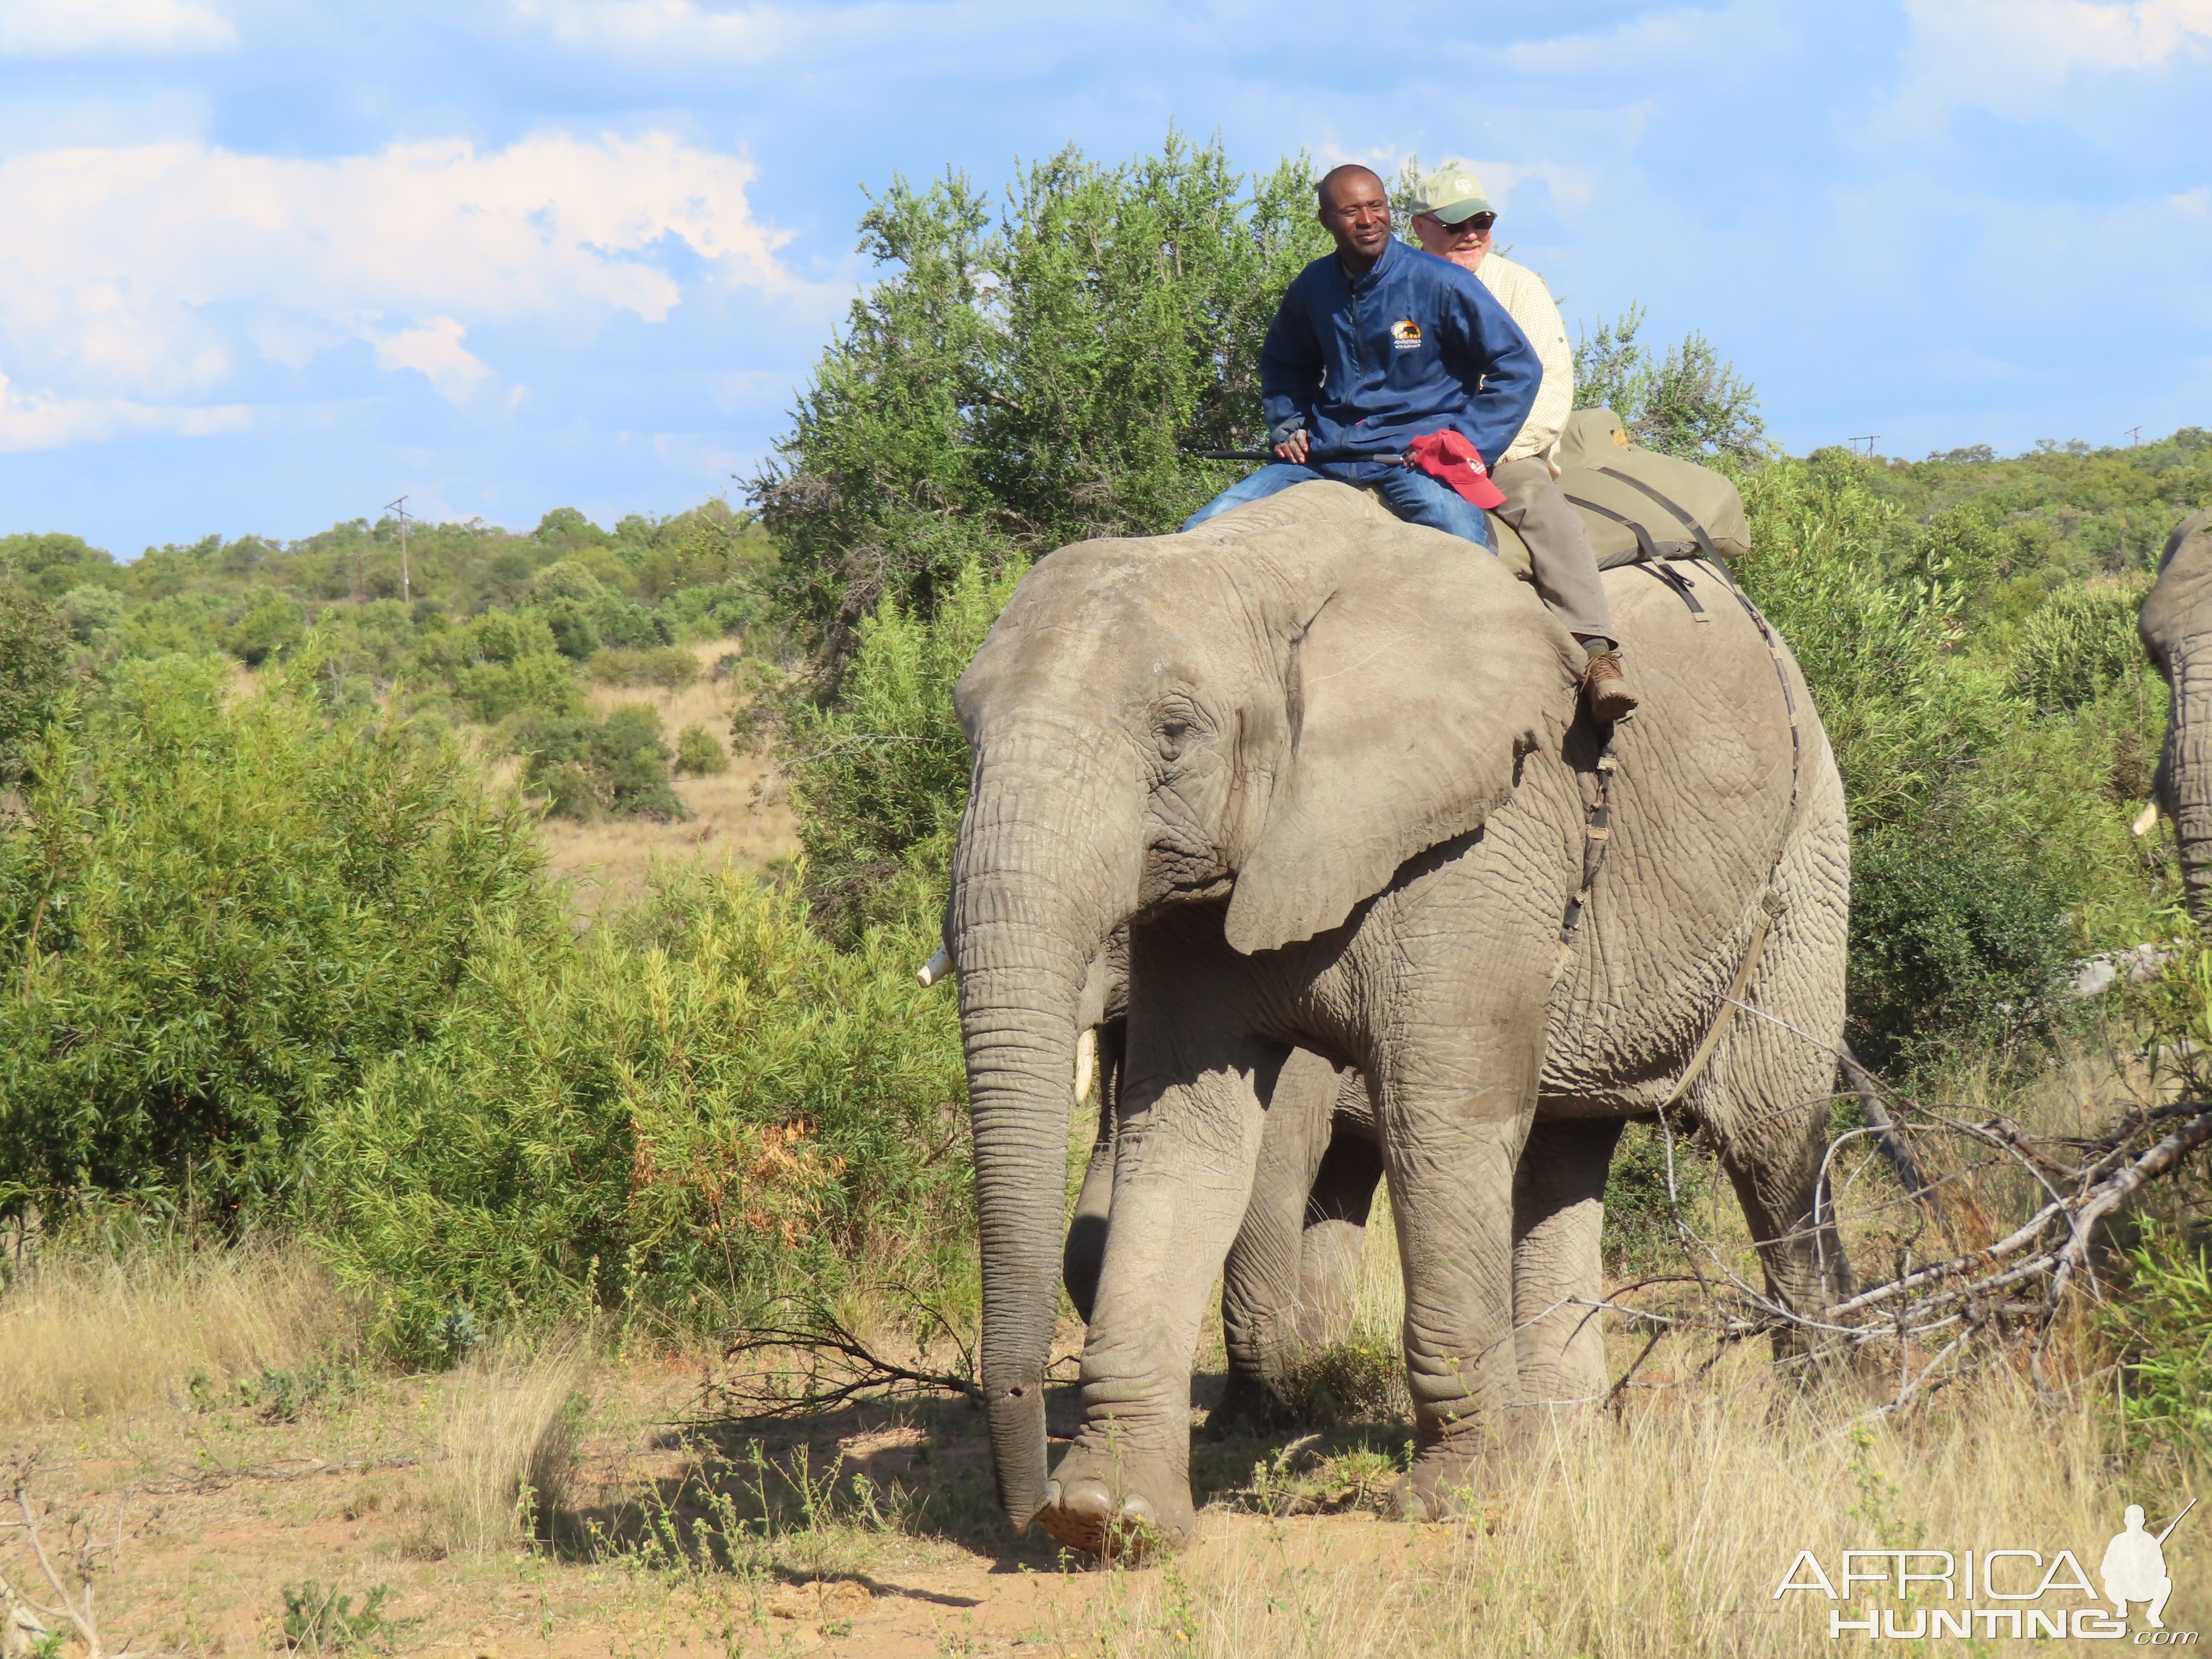 Elephant Rides Limpopo South Africa